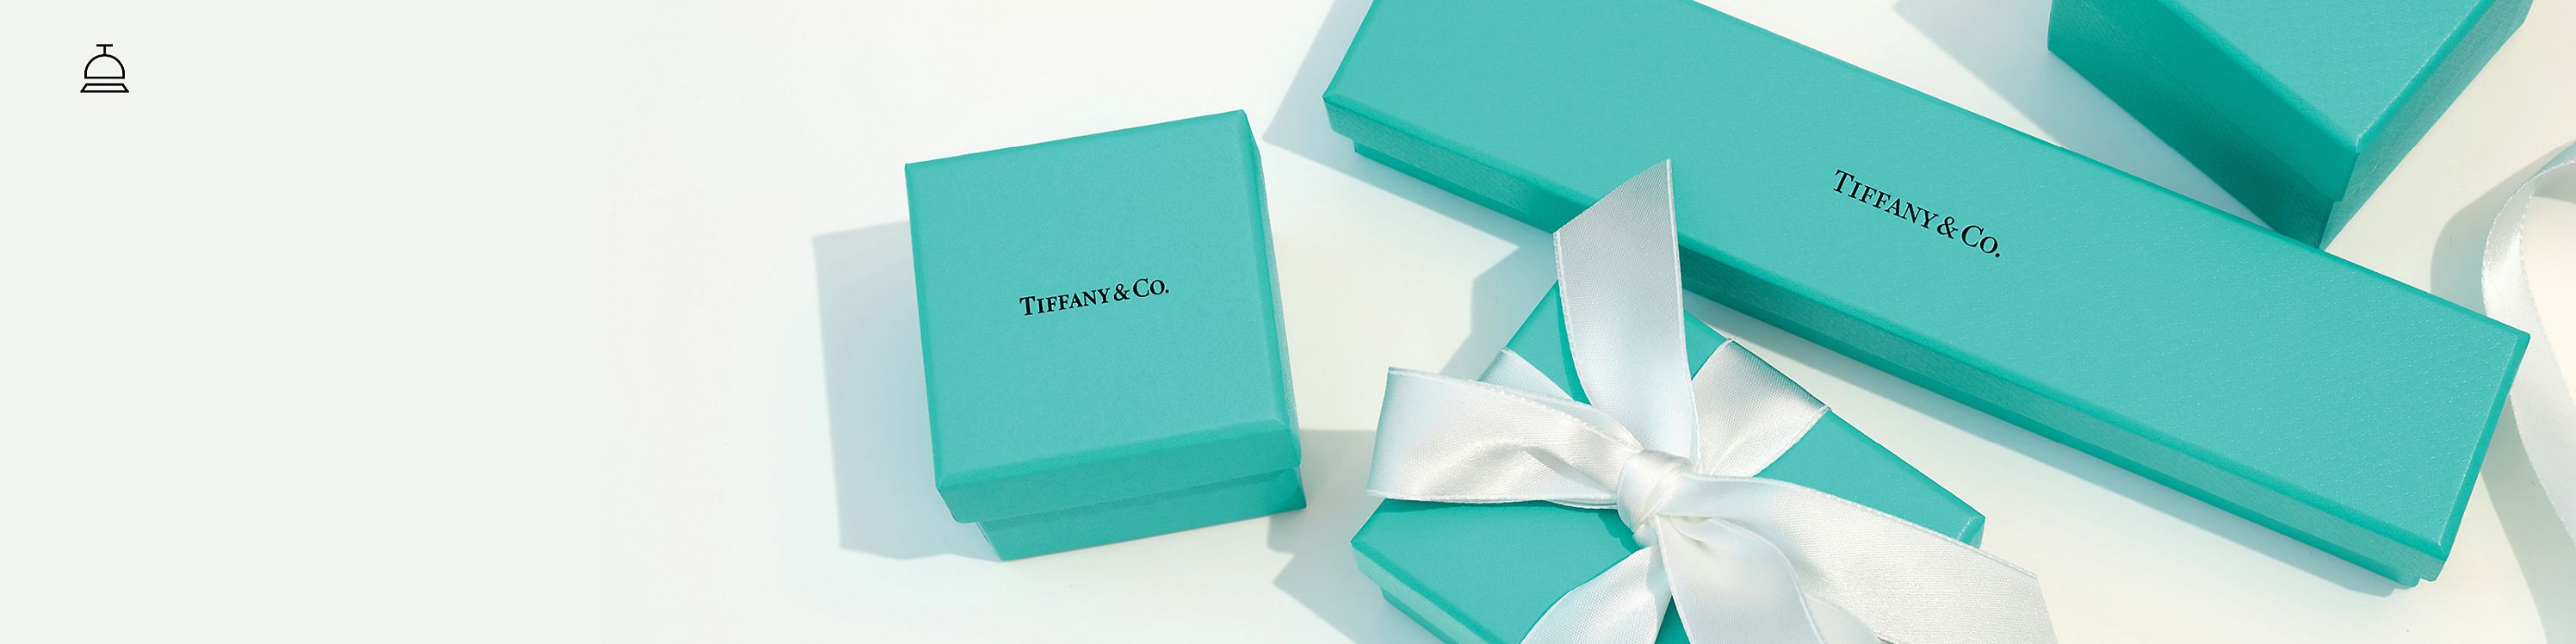 Client Care | Tiffany & Co.